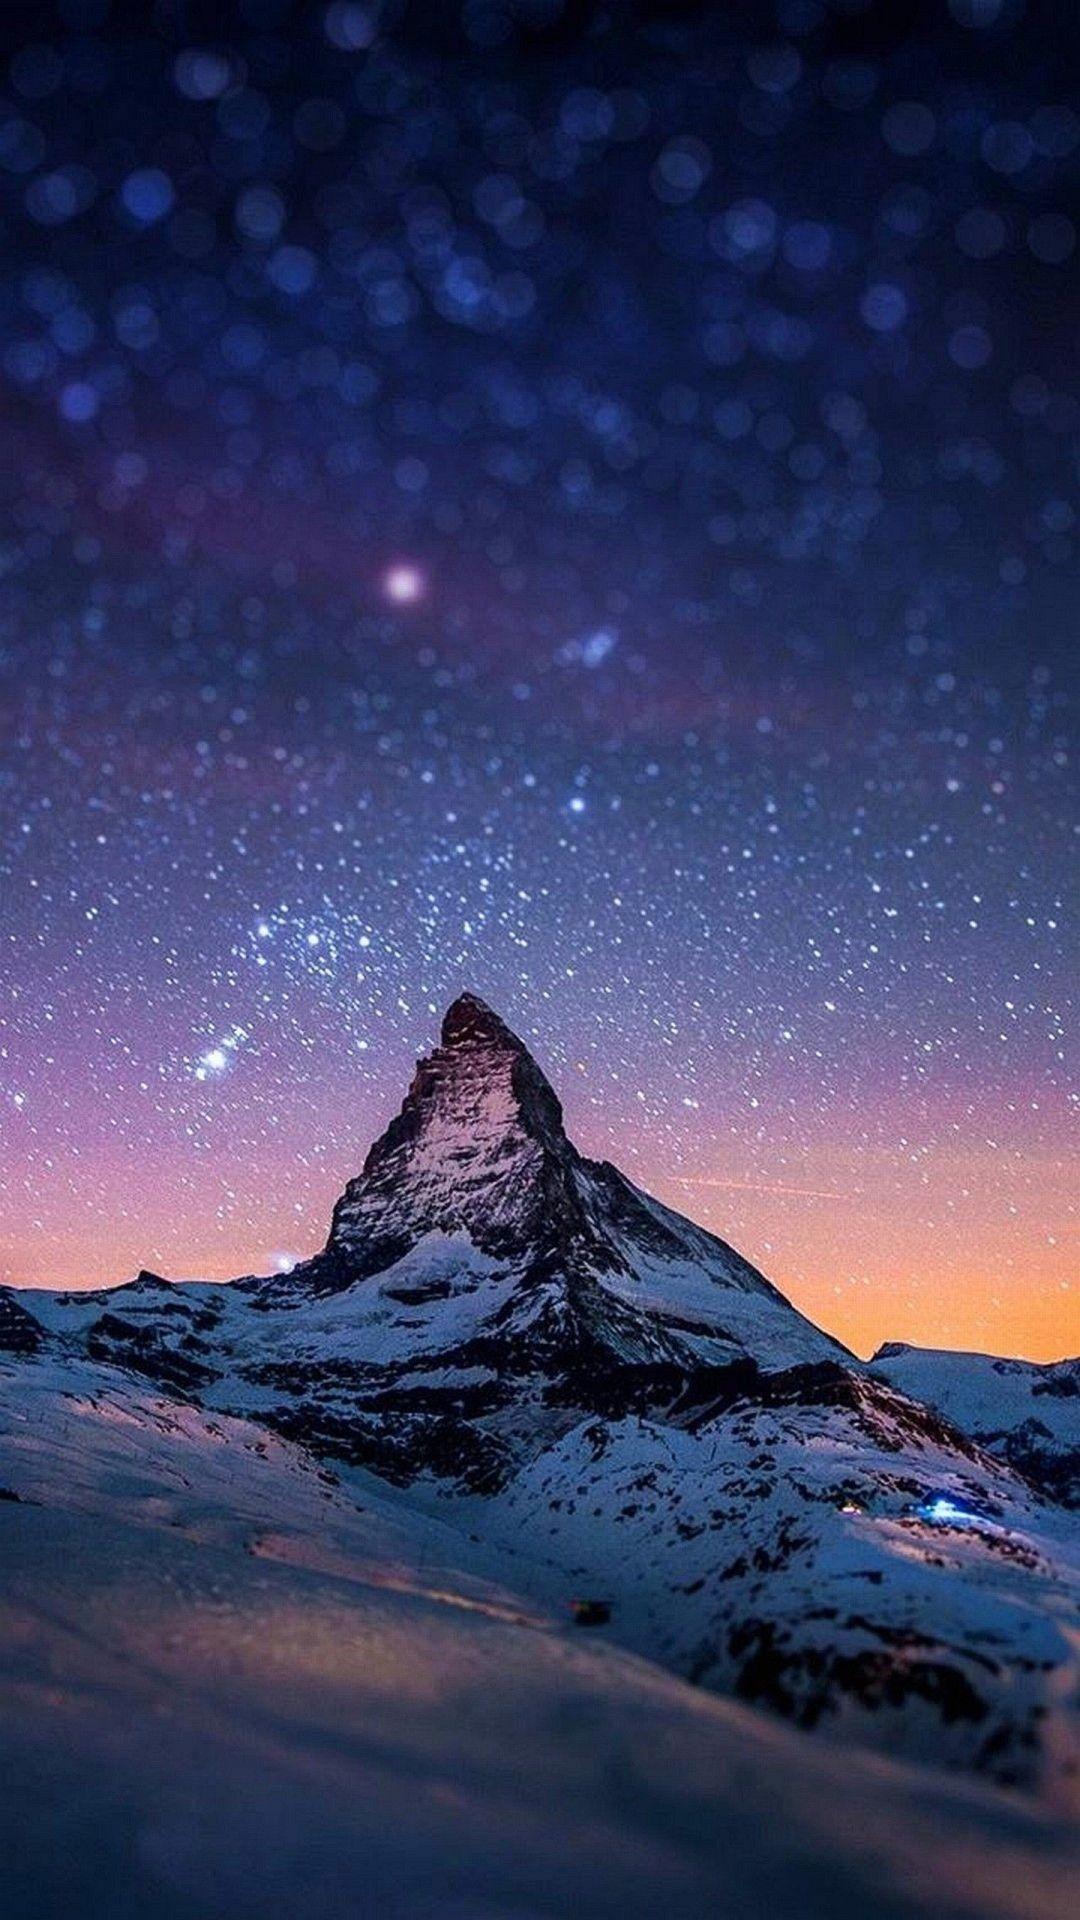 Night and stars HD Wallpaper for iPhone 7